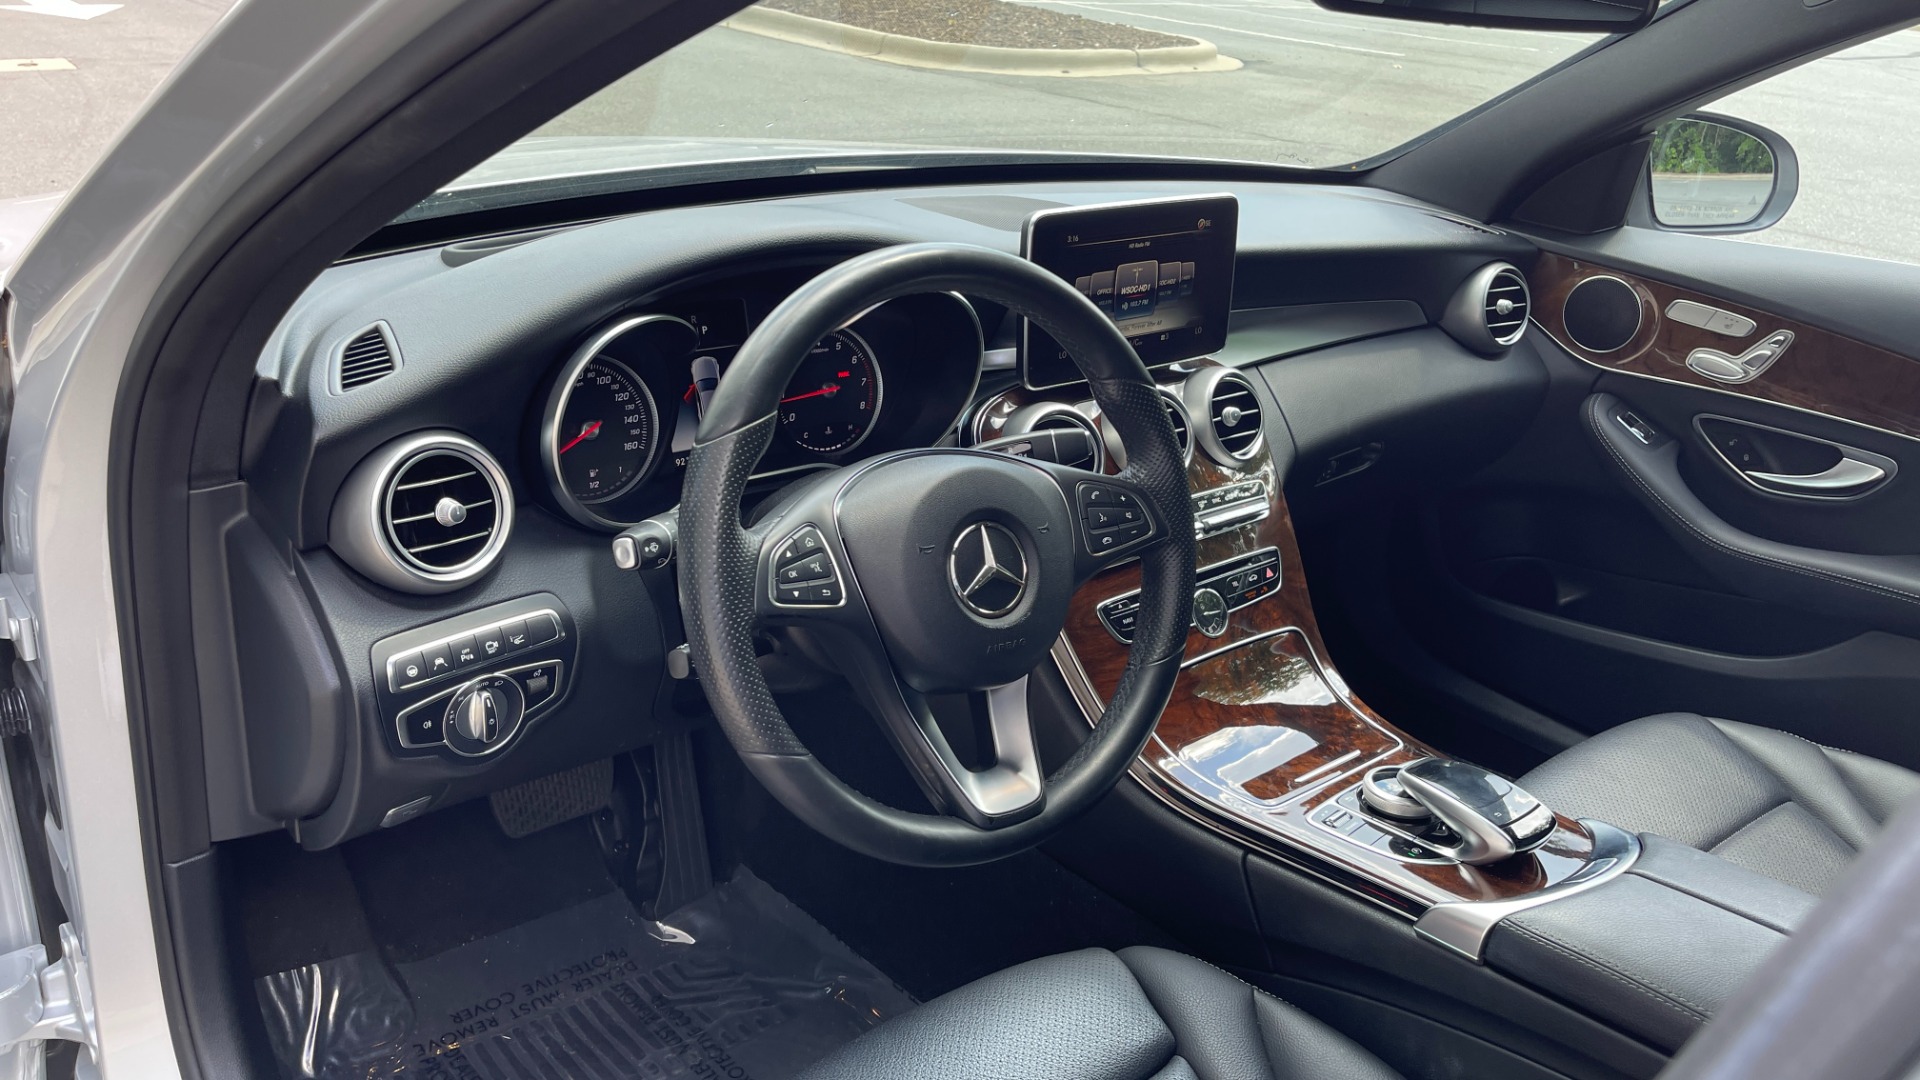 Used 2018 Mercedes-Benz C-Class C300 / PANORAMIC / HEADS UP DISPLAY / ADVANCED LIGHTING / PREMIUM ASSISTANC for sale $30,995 at Formula Imports in Charlotte NC 28227 9